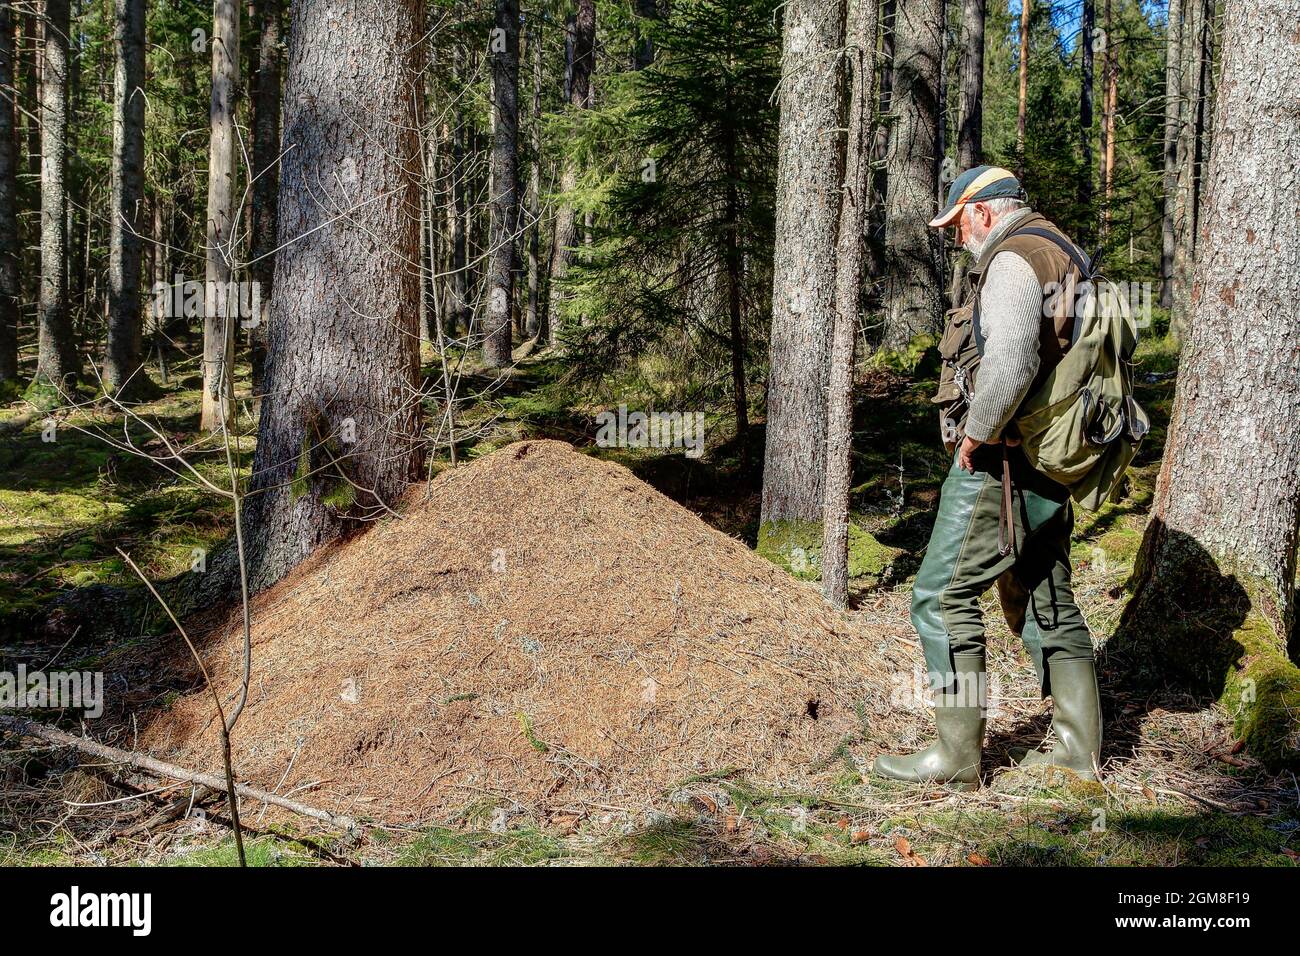 In spring, an keeper of ants  stands at an anthill in the forest. March is the season start for the forest ants. Stock Photo